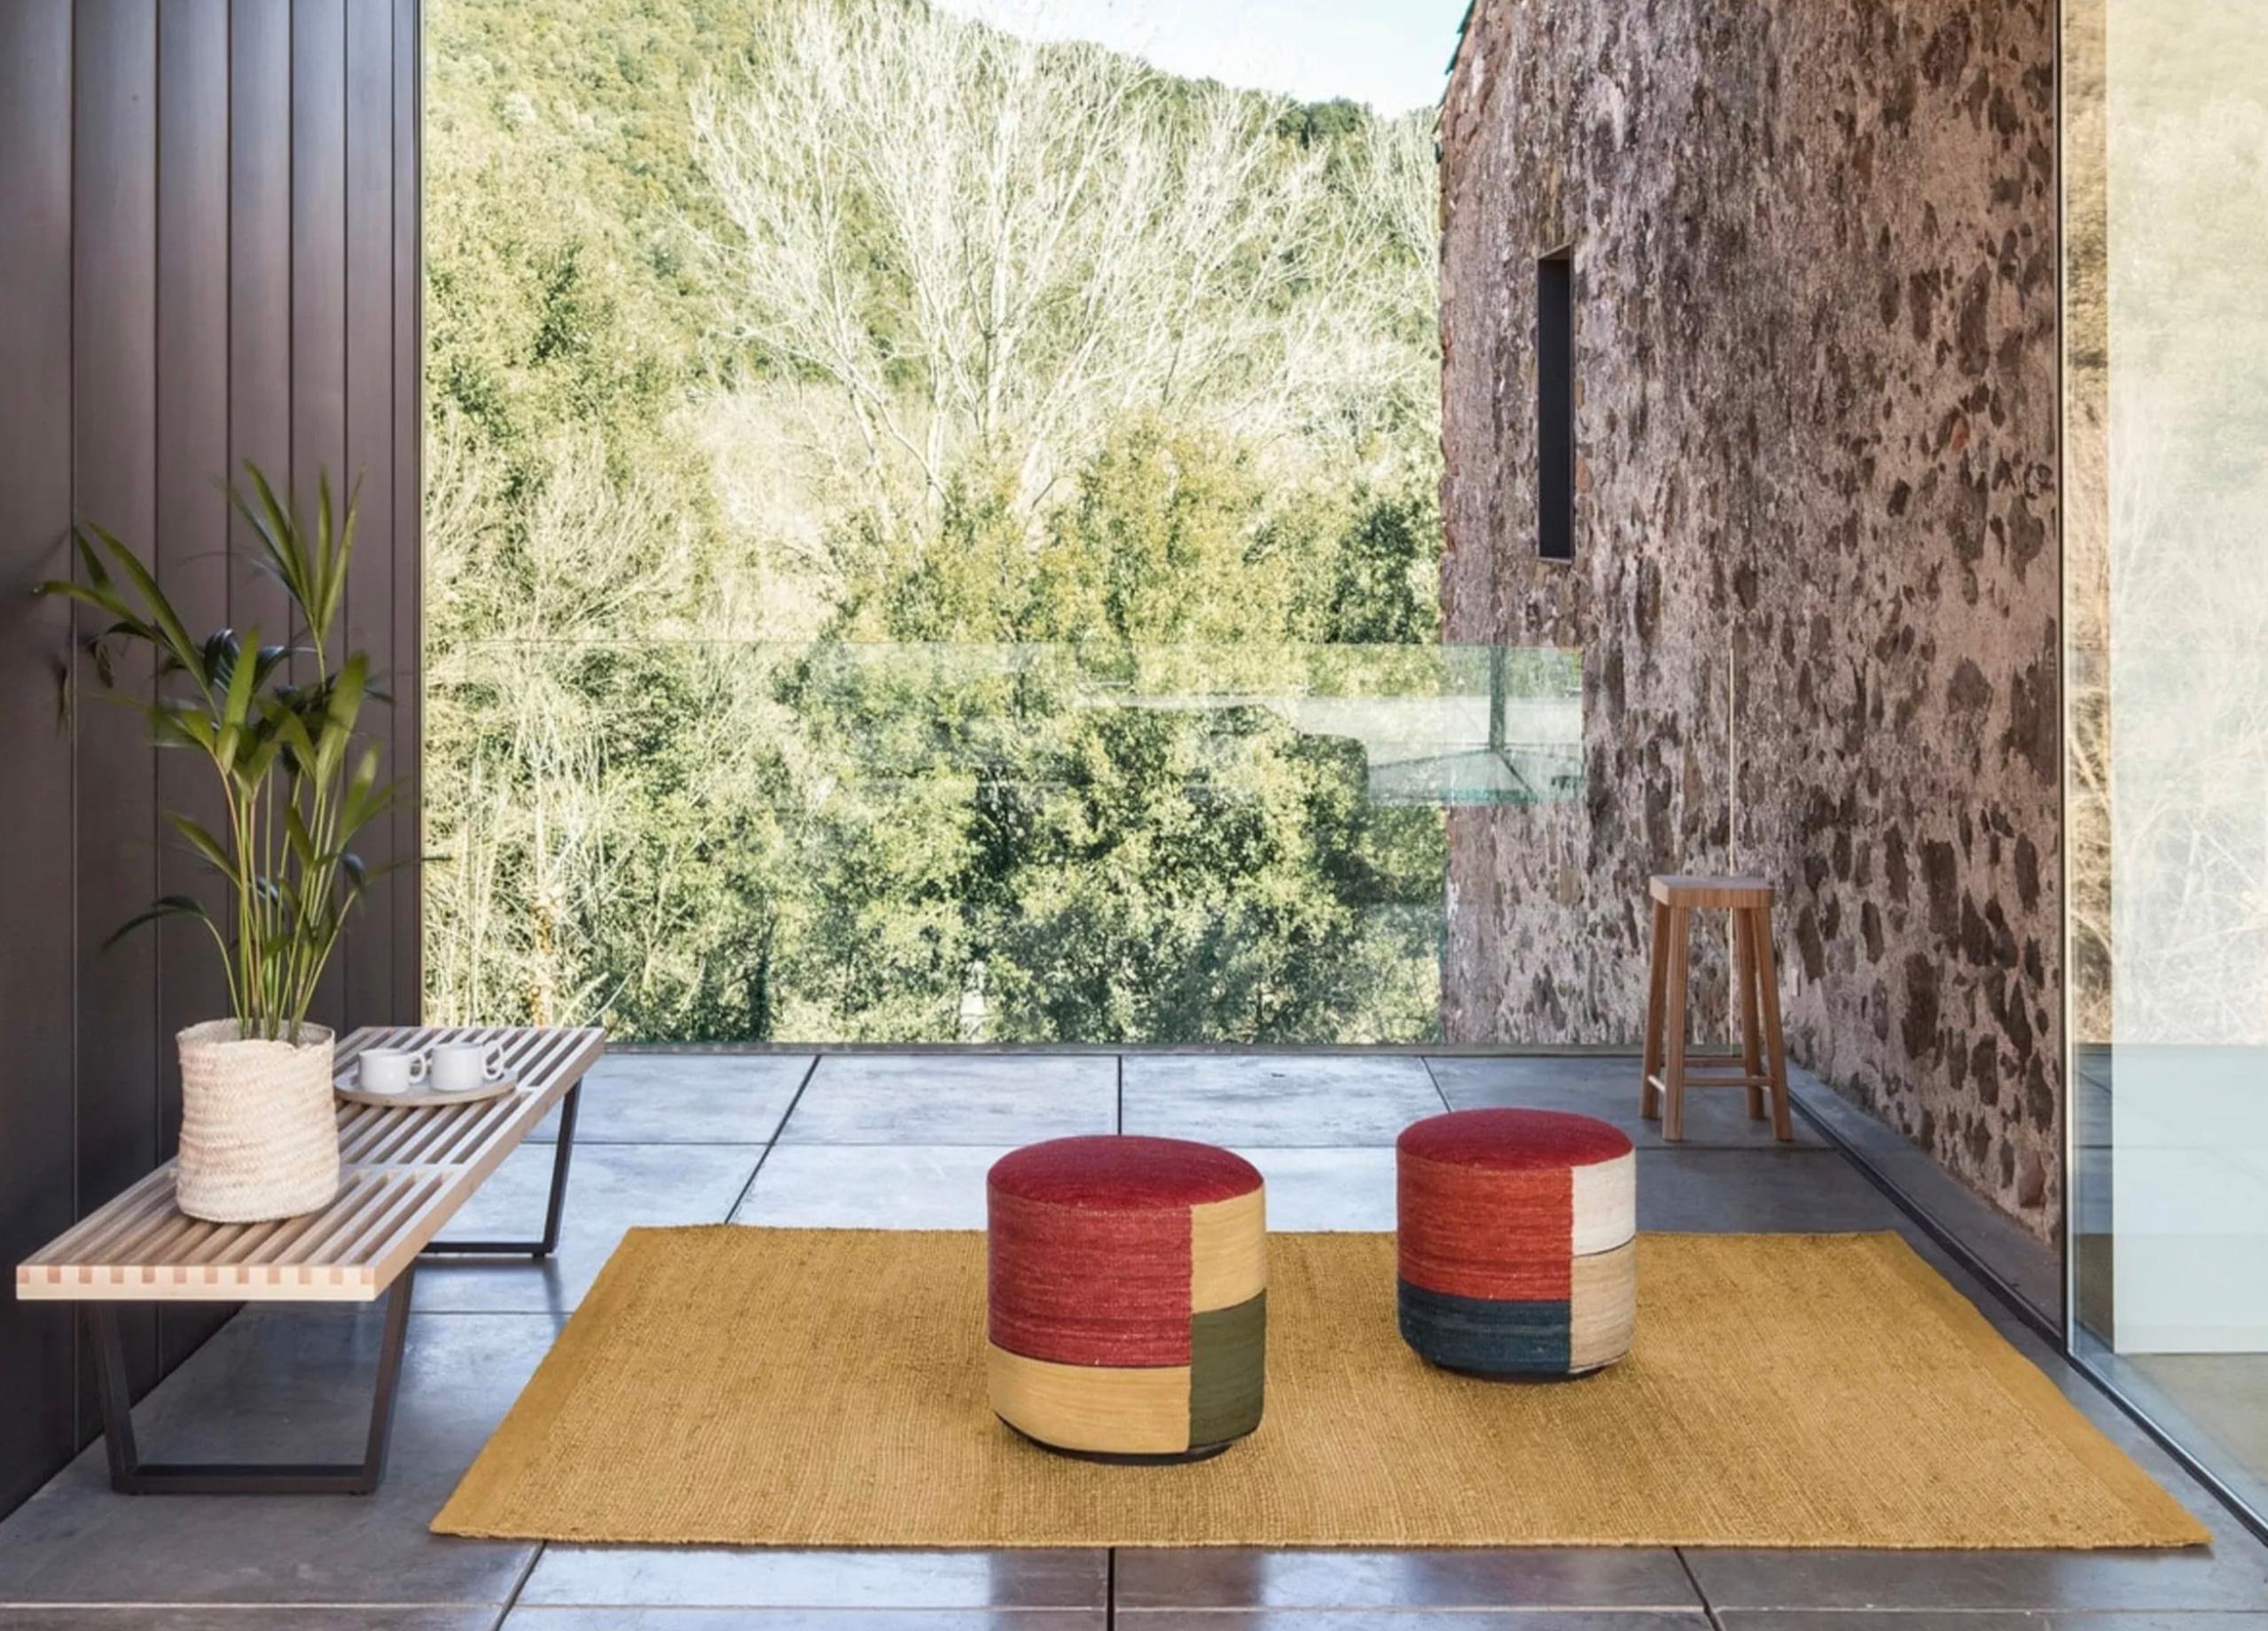 Nani Marquina & Marcos Catalán Set of 4 'Kilim' Poufs for Nanimarquina. New, current production. Set of 4.

With the desire to transfer the experience and knowledge of the textile world to a three-dimensional element, nanimarquina adds the Kilim